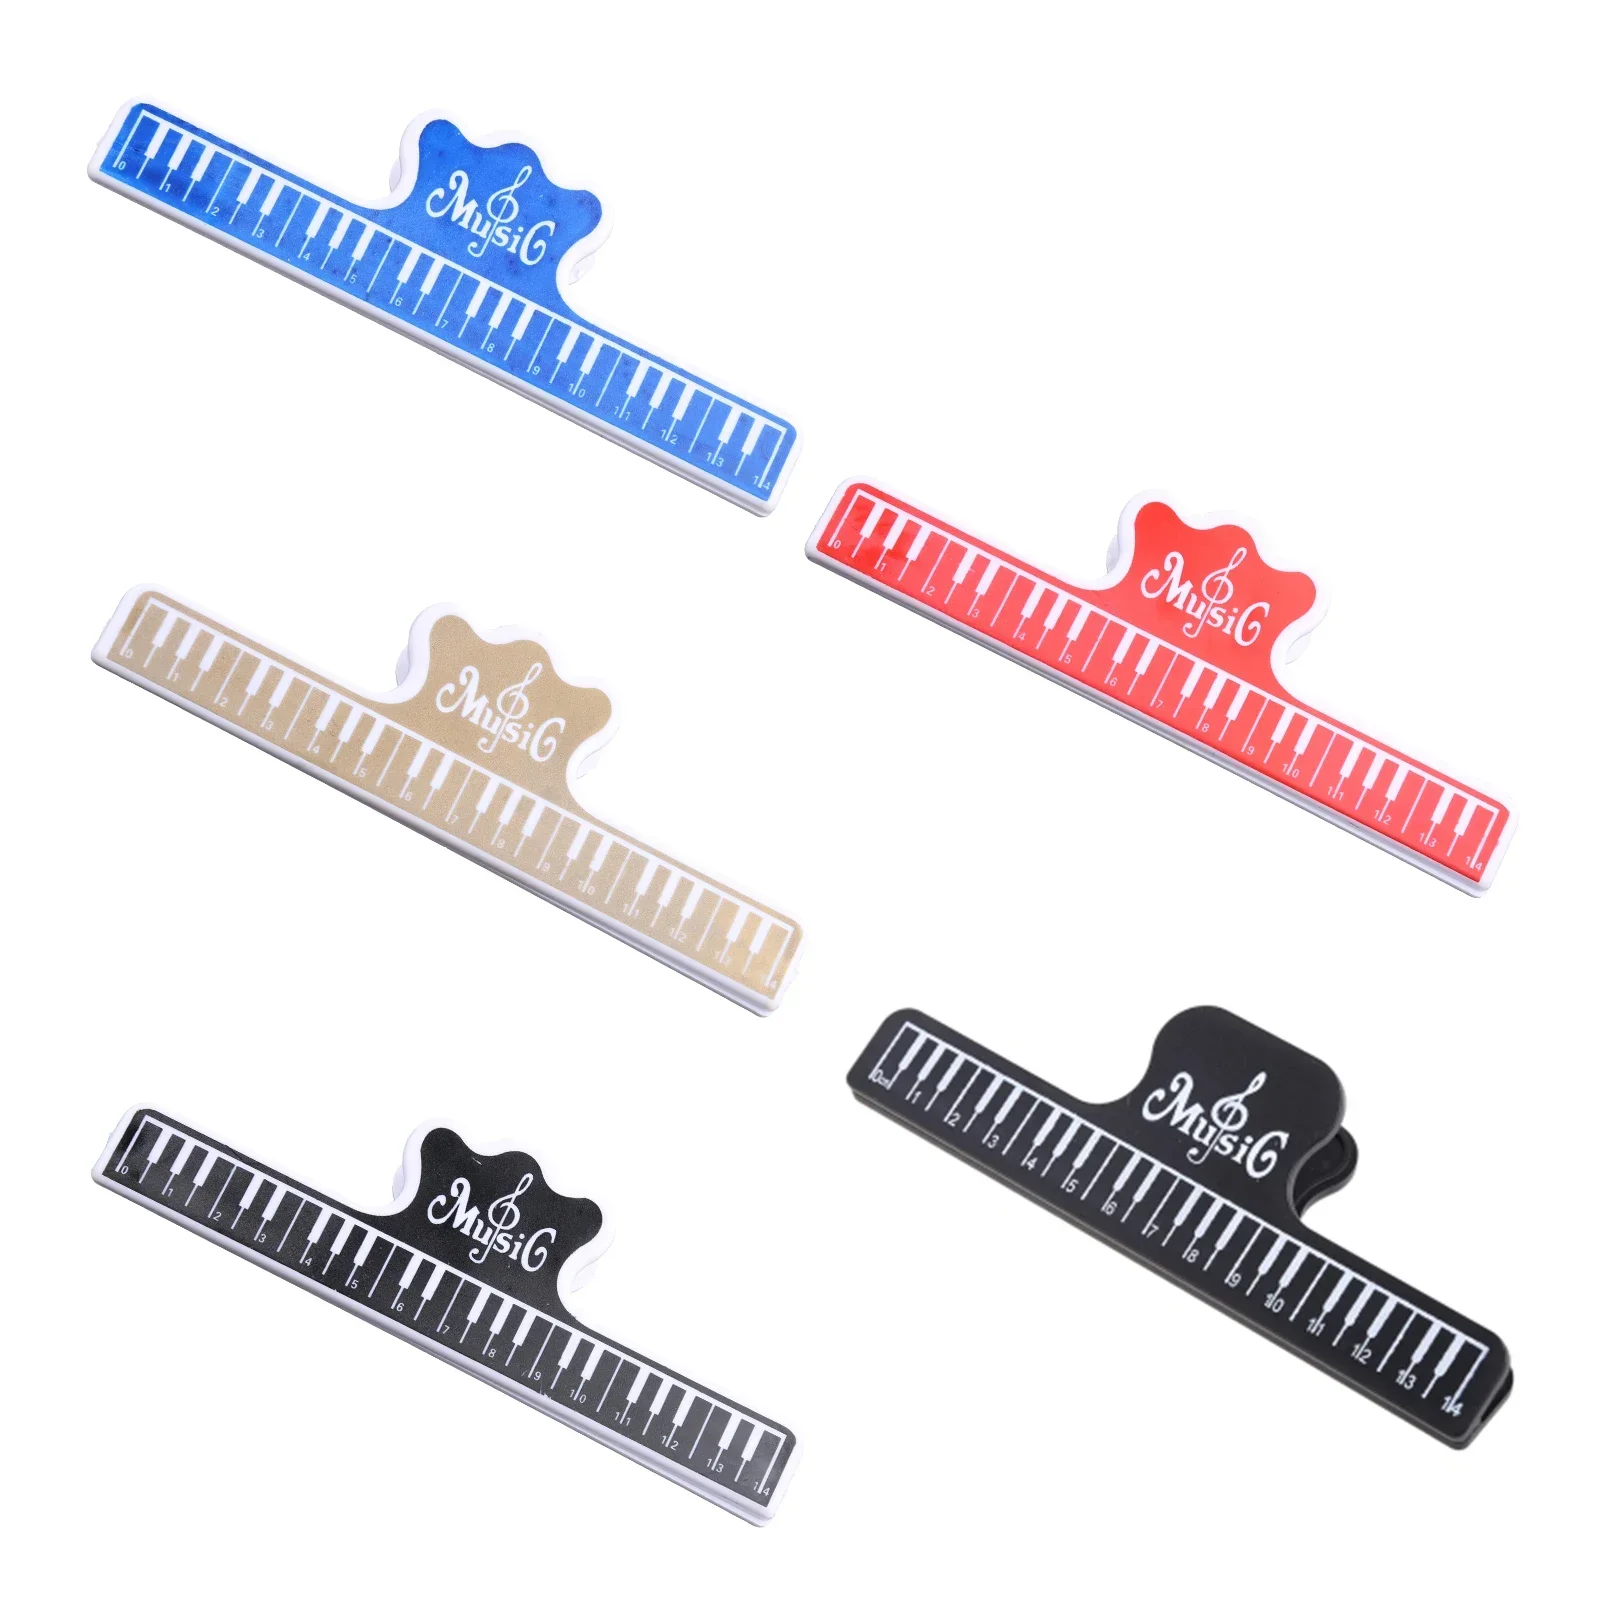 

Sheet Music Clip Book Page Note Clips Music Score Fixed Clips Sheet Holder for Guitar Violin Piano Music Instruments Accessories